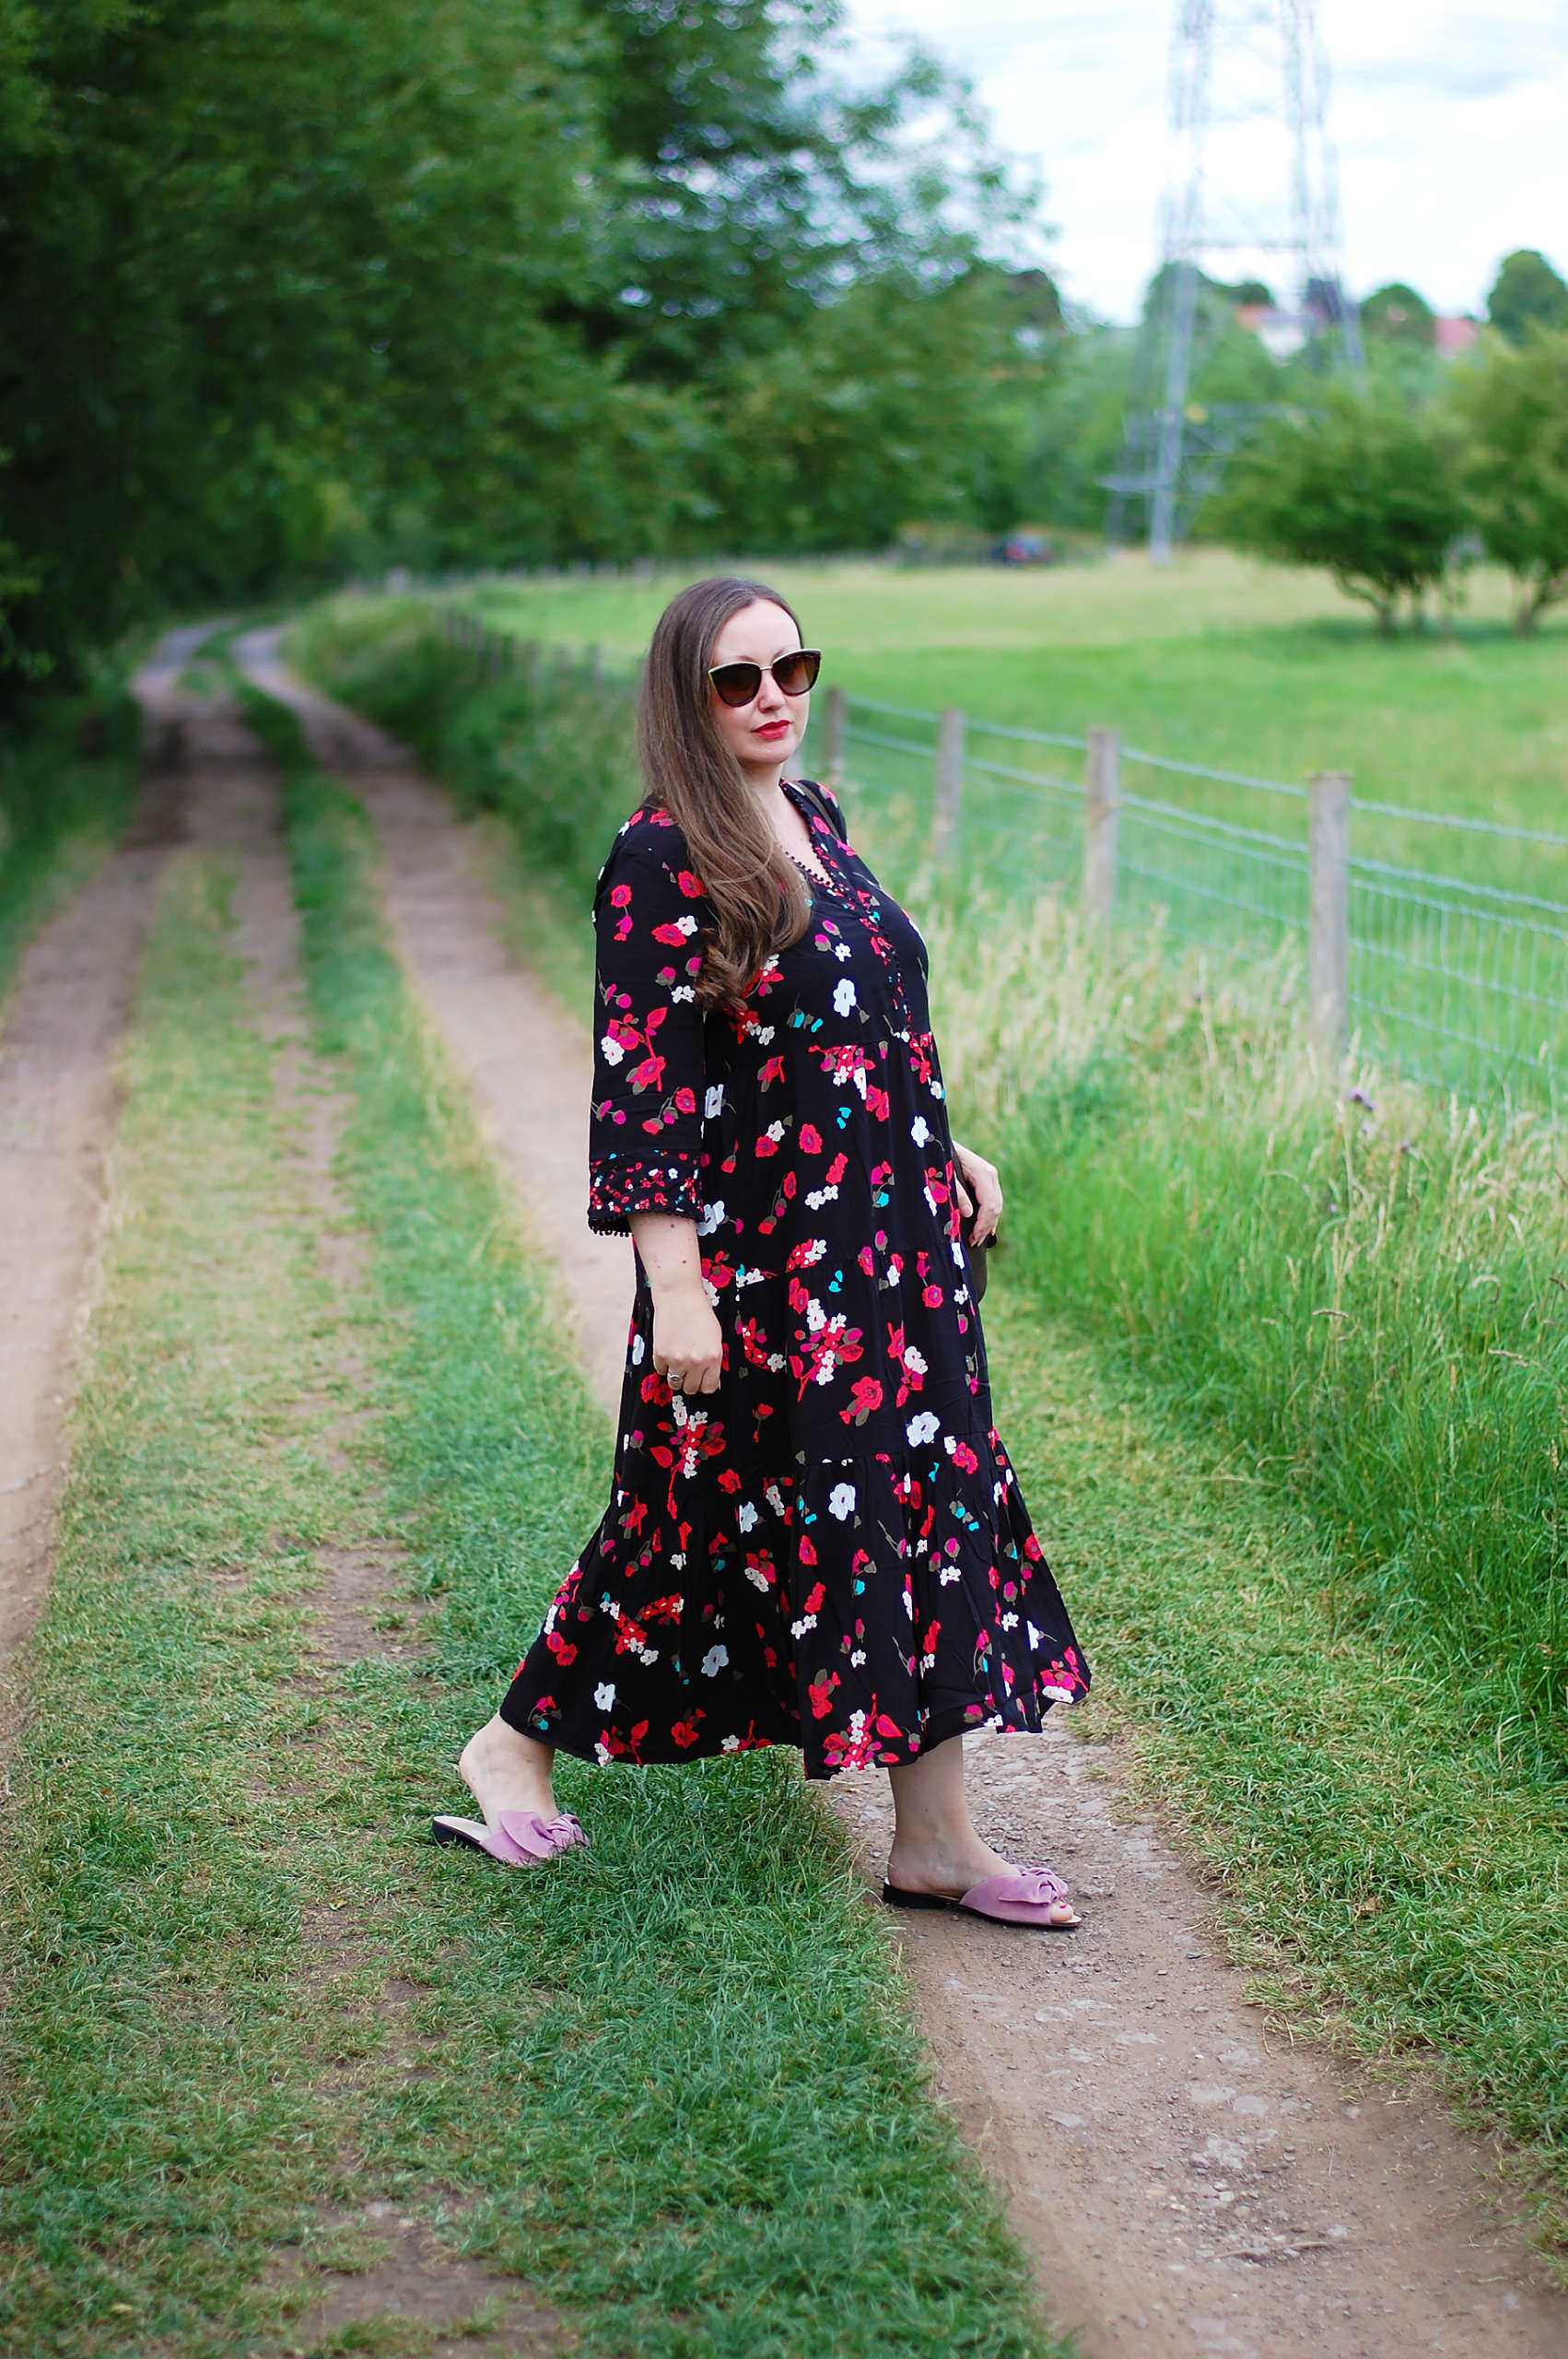 laura Ashley Black floral maxi dress outfit